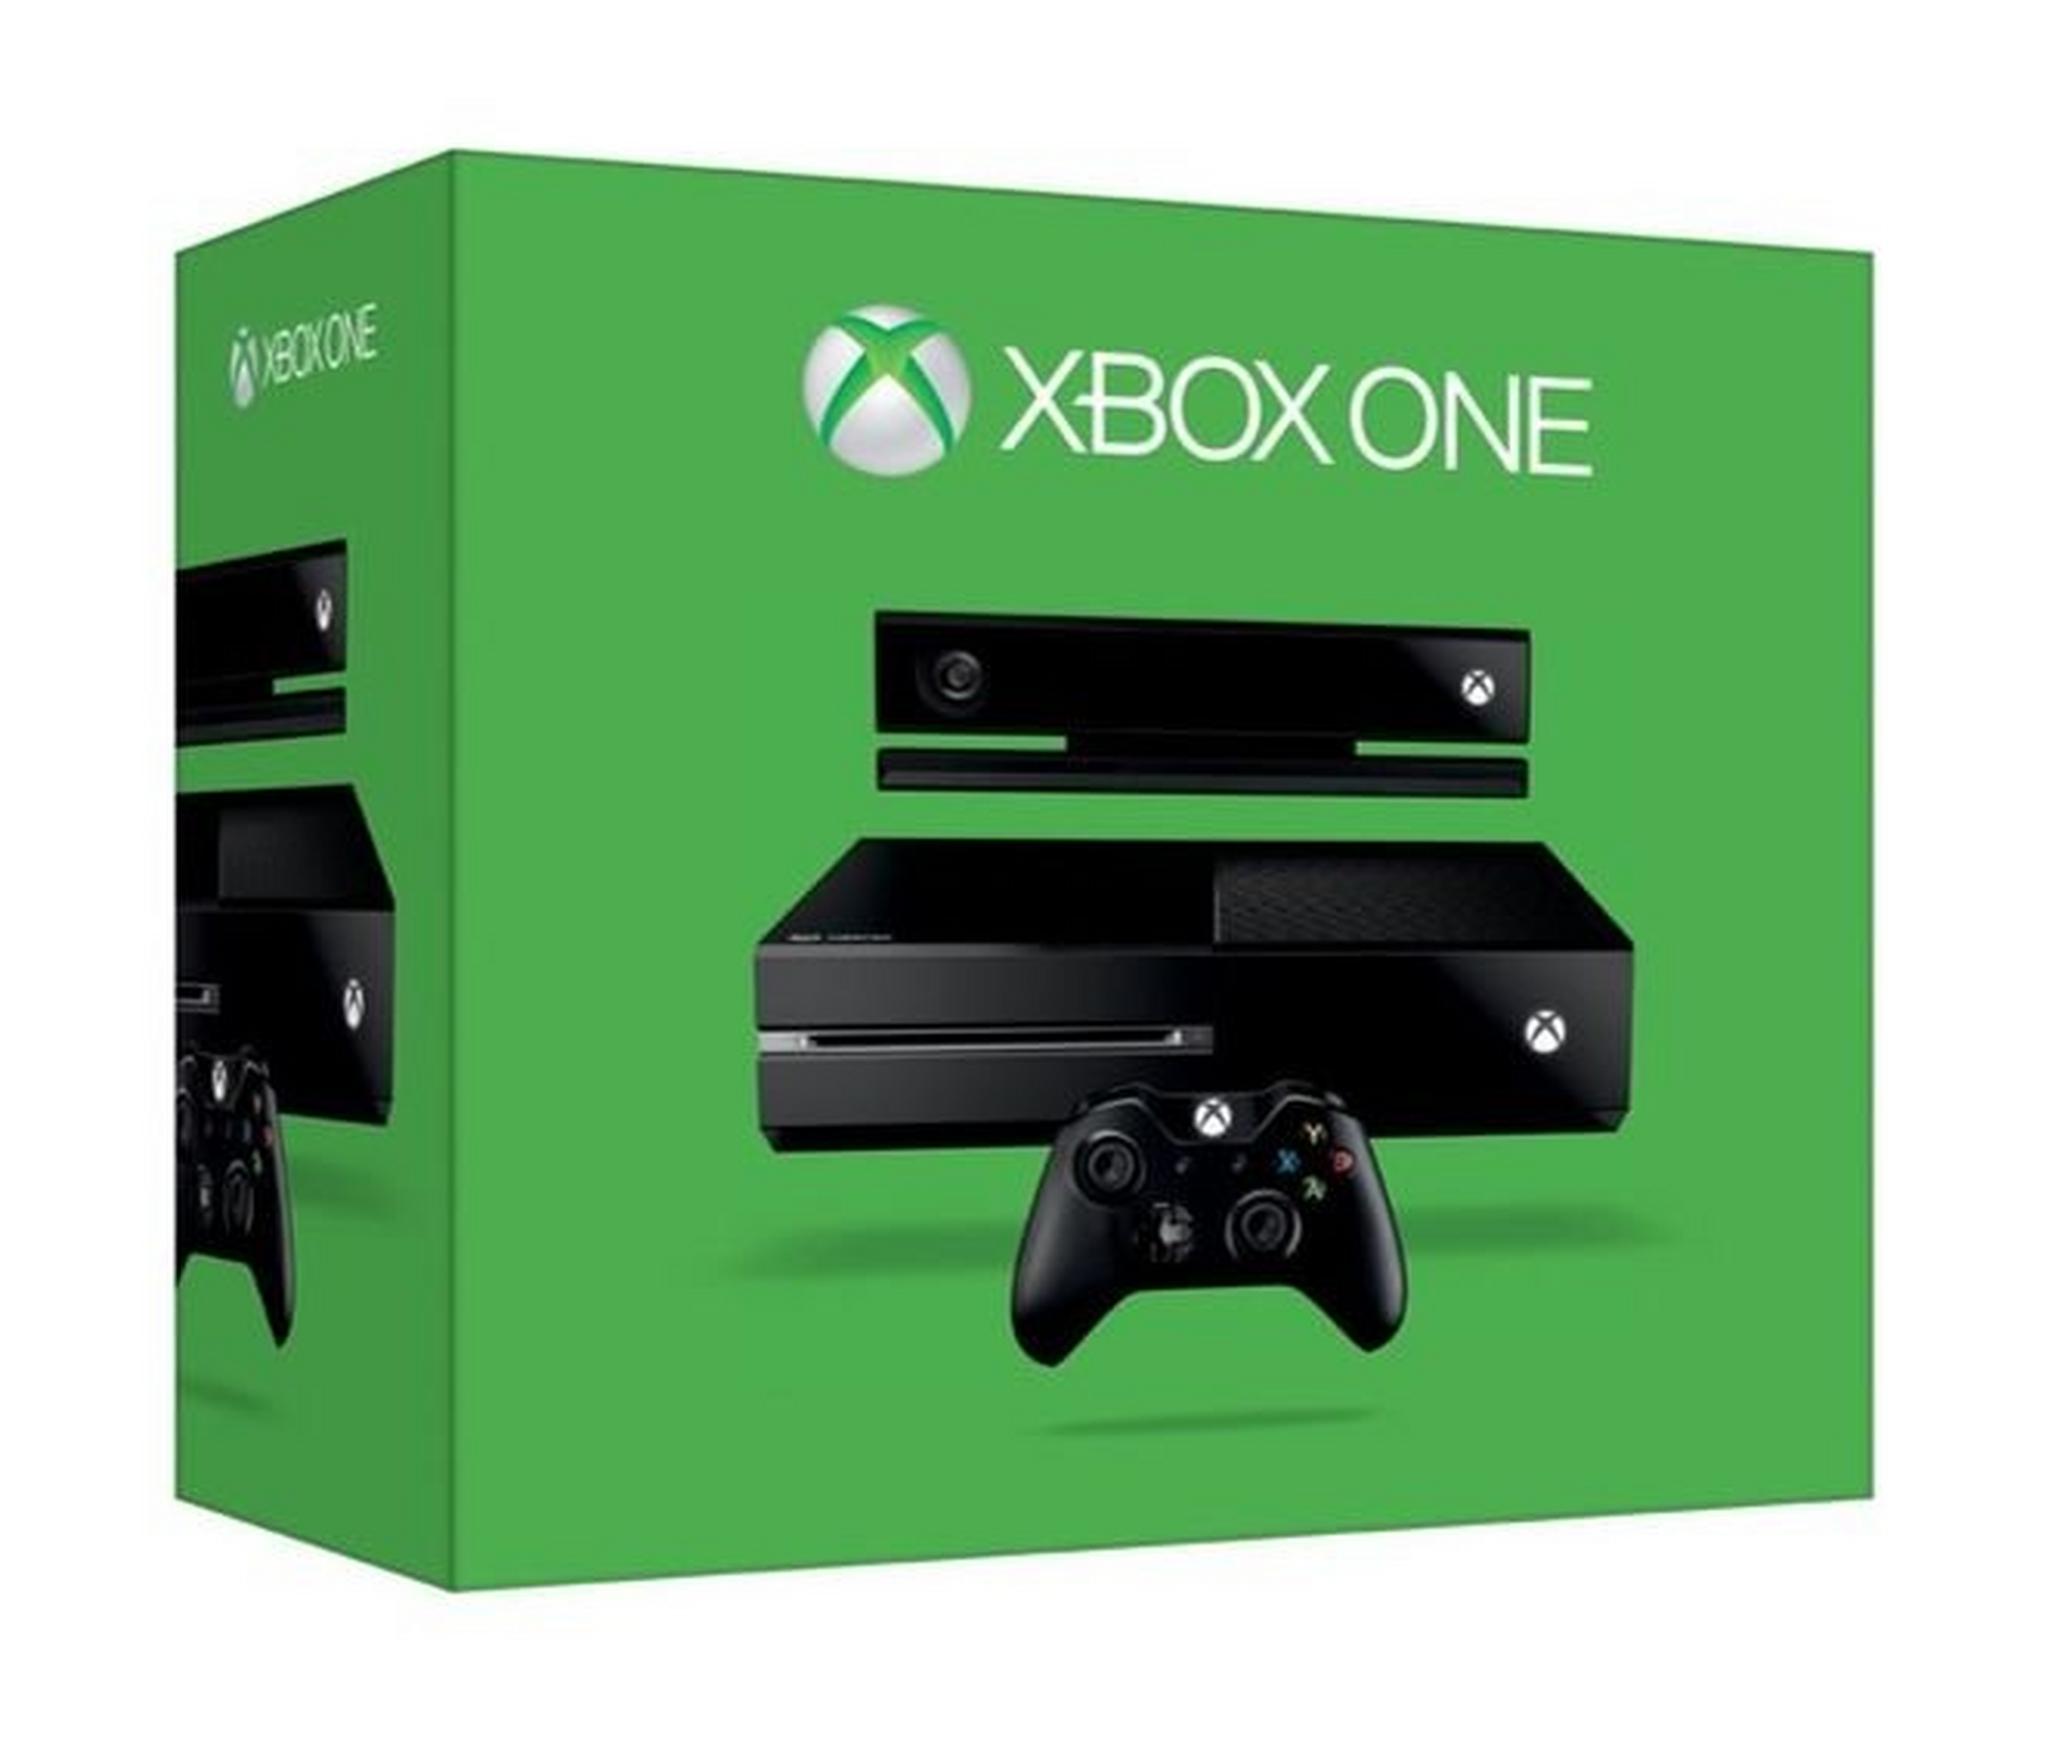 Microsoft Xbox One 500GB Console With Kinect Sensor + 2 Games + 1 Controller + 3 Month Xbox Live Gold Membership